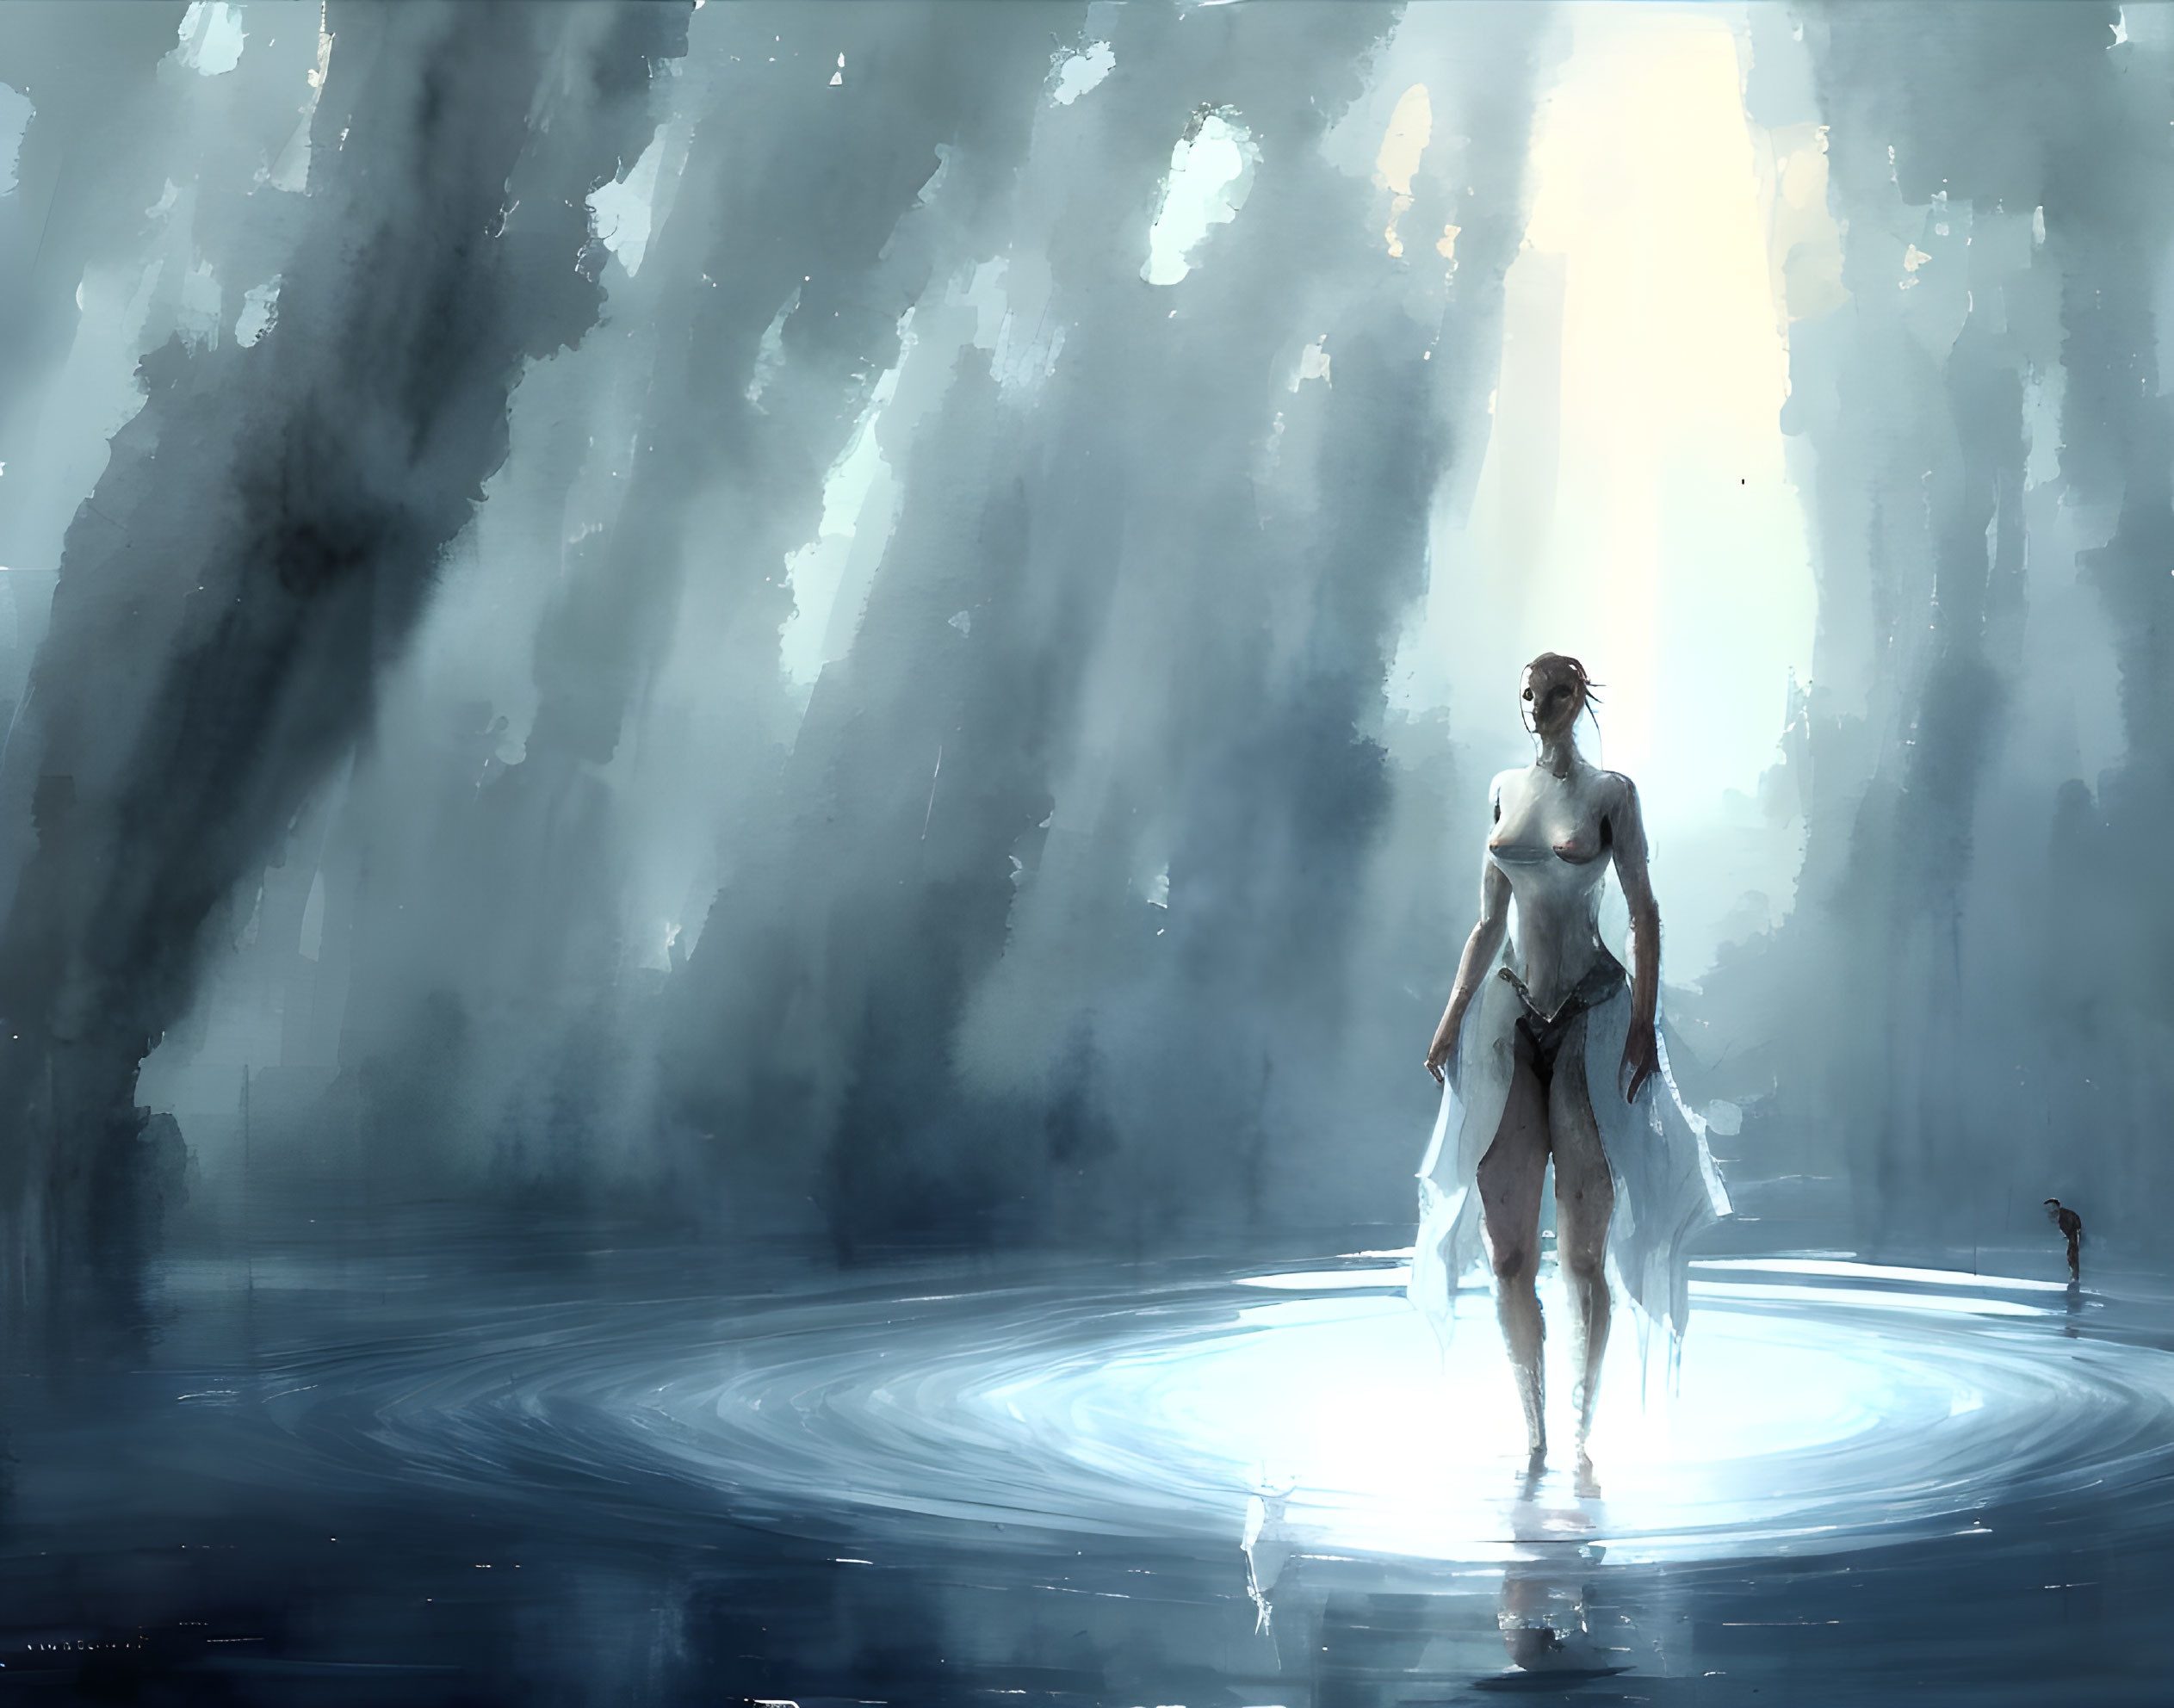 Solitary Figure in Water Surrounded by Ethereal Sunlight